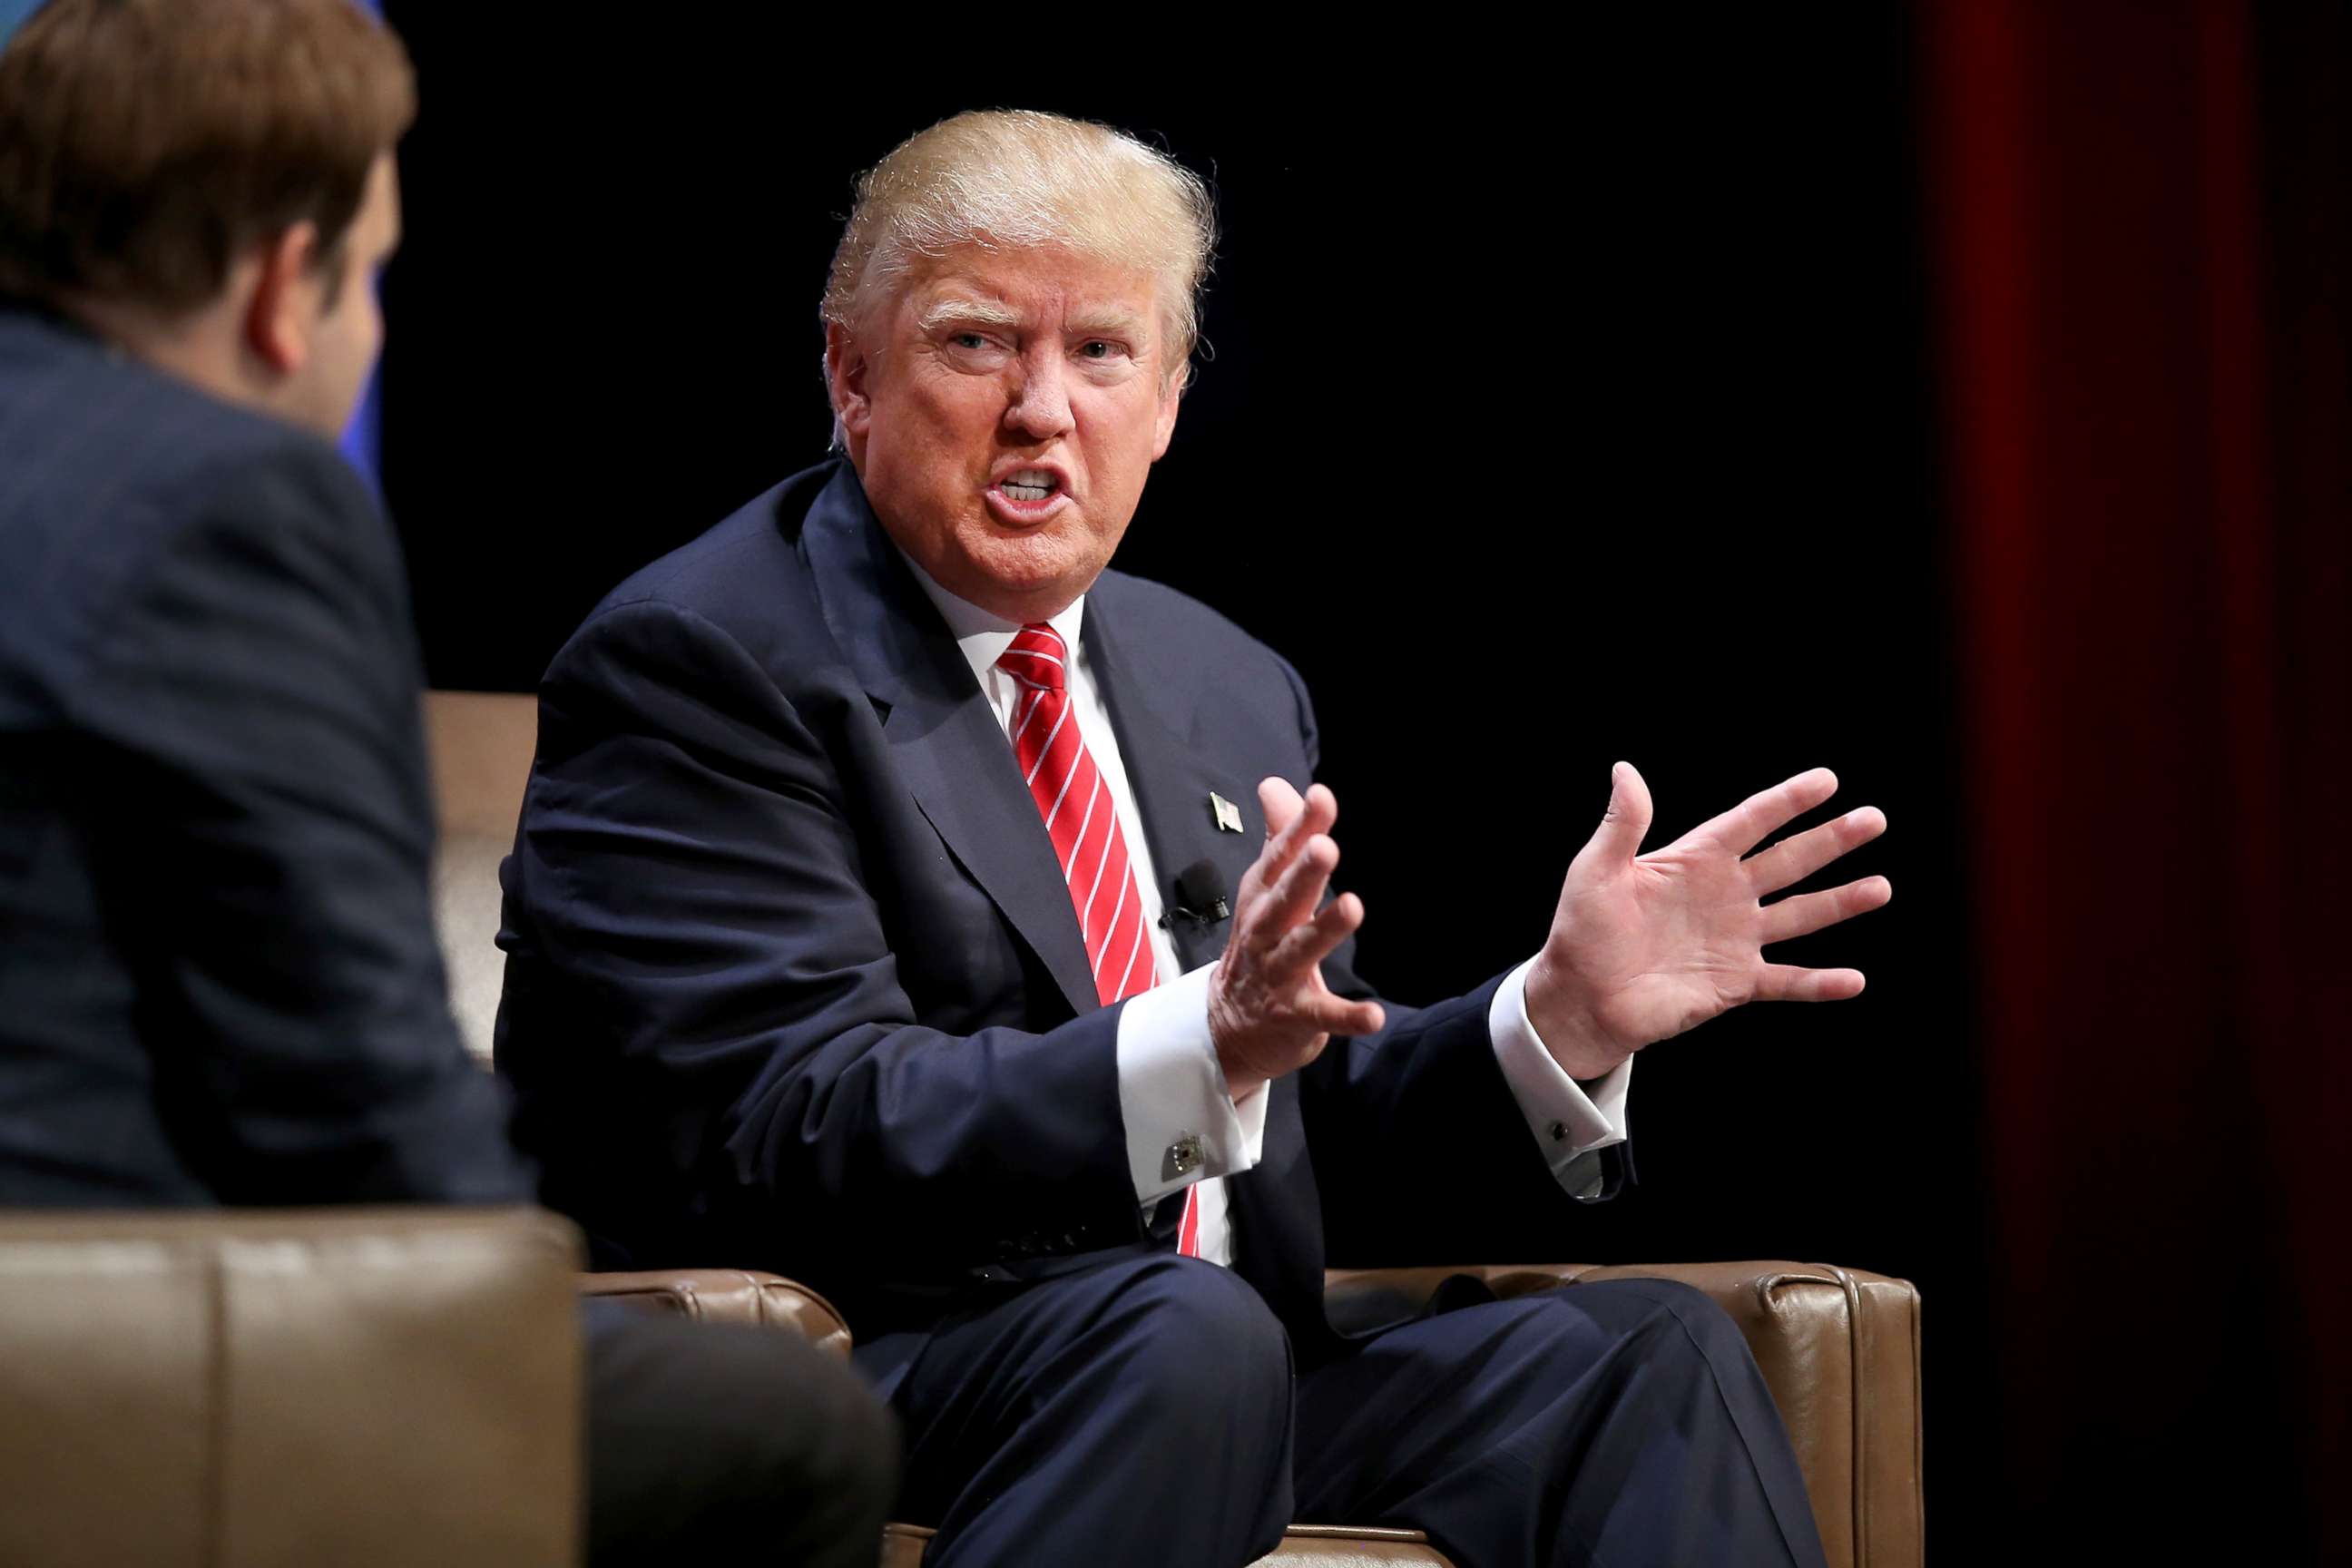 PHOTO: Republican presidential hopeful Donald Trump fields questions from Frank Luntz at the Family Leadership Summit at Stephens Auditorium, July 18, 2015, in Ames, Iowa.